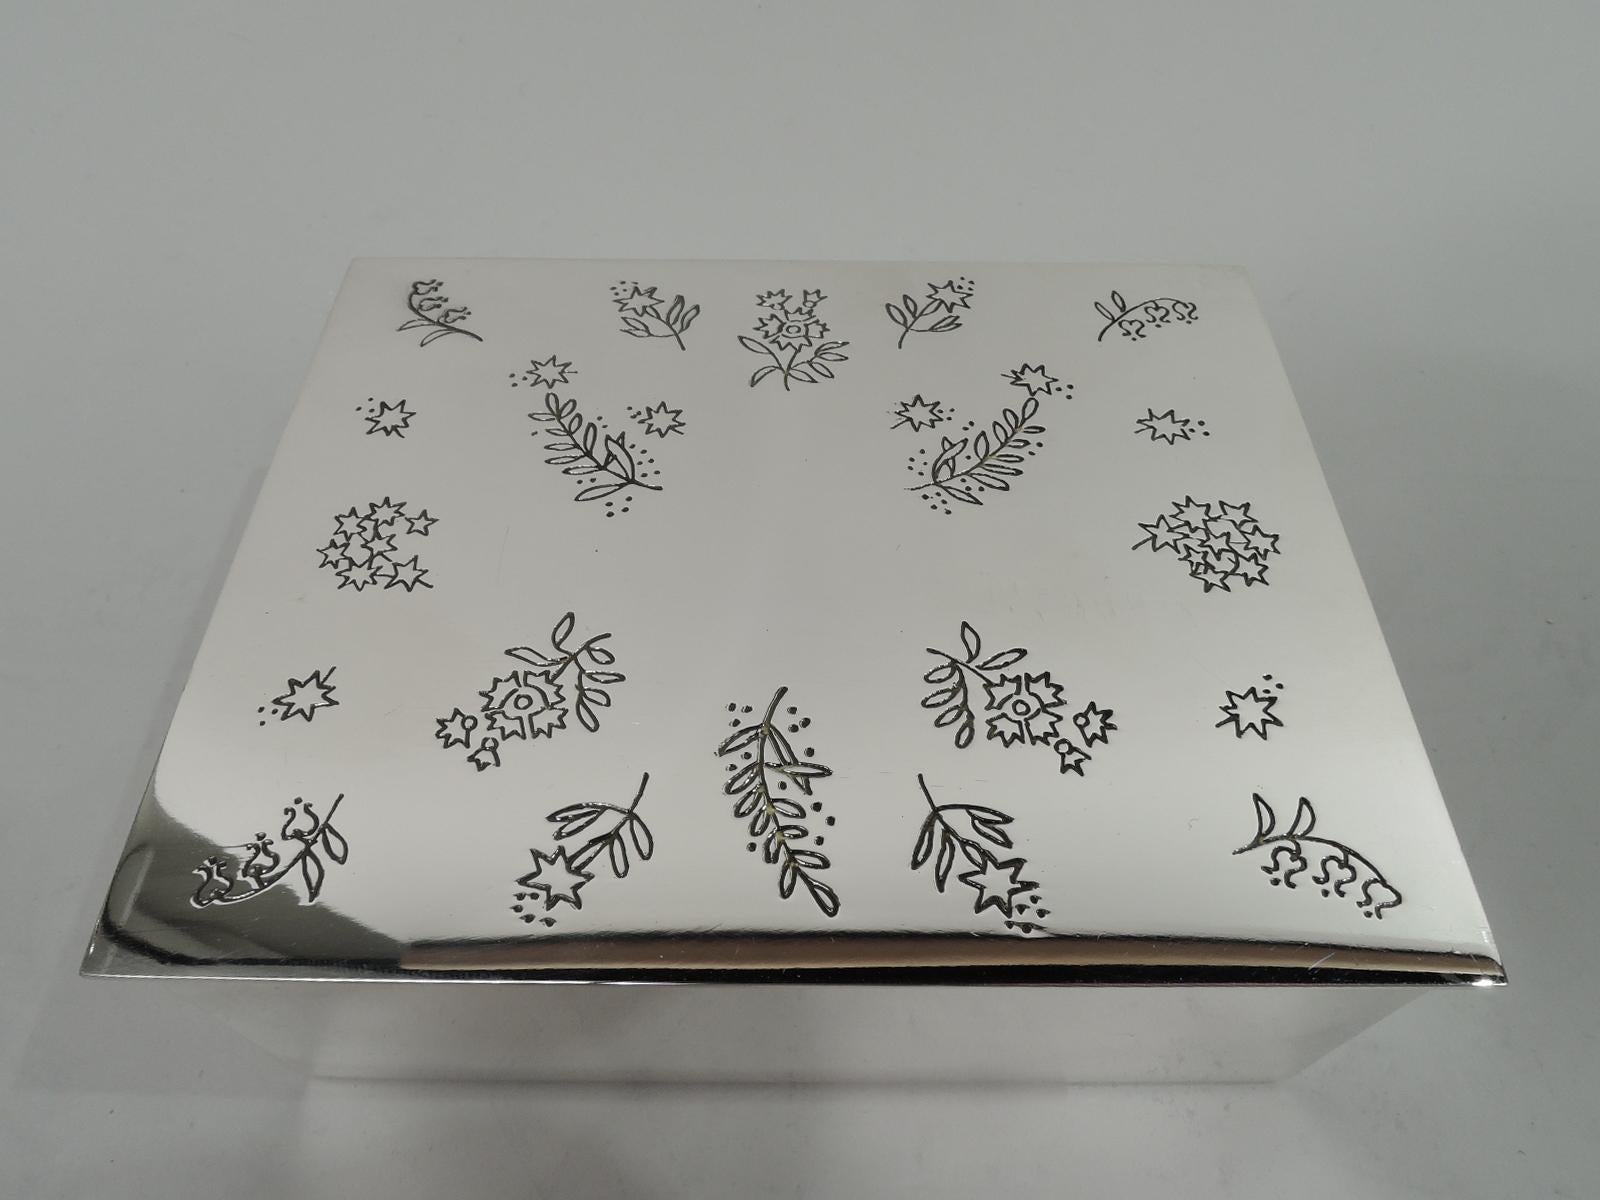 Mid-Century Modern sterling silver jewelry box. Made by Tiffany & Co. in New York. Rectangular with straight sides. Cover flat, hinged and overhanging. Cover top engraved with scattered flowers. Box interior velvet lined. Fully marked including